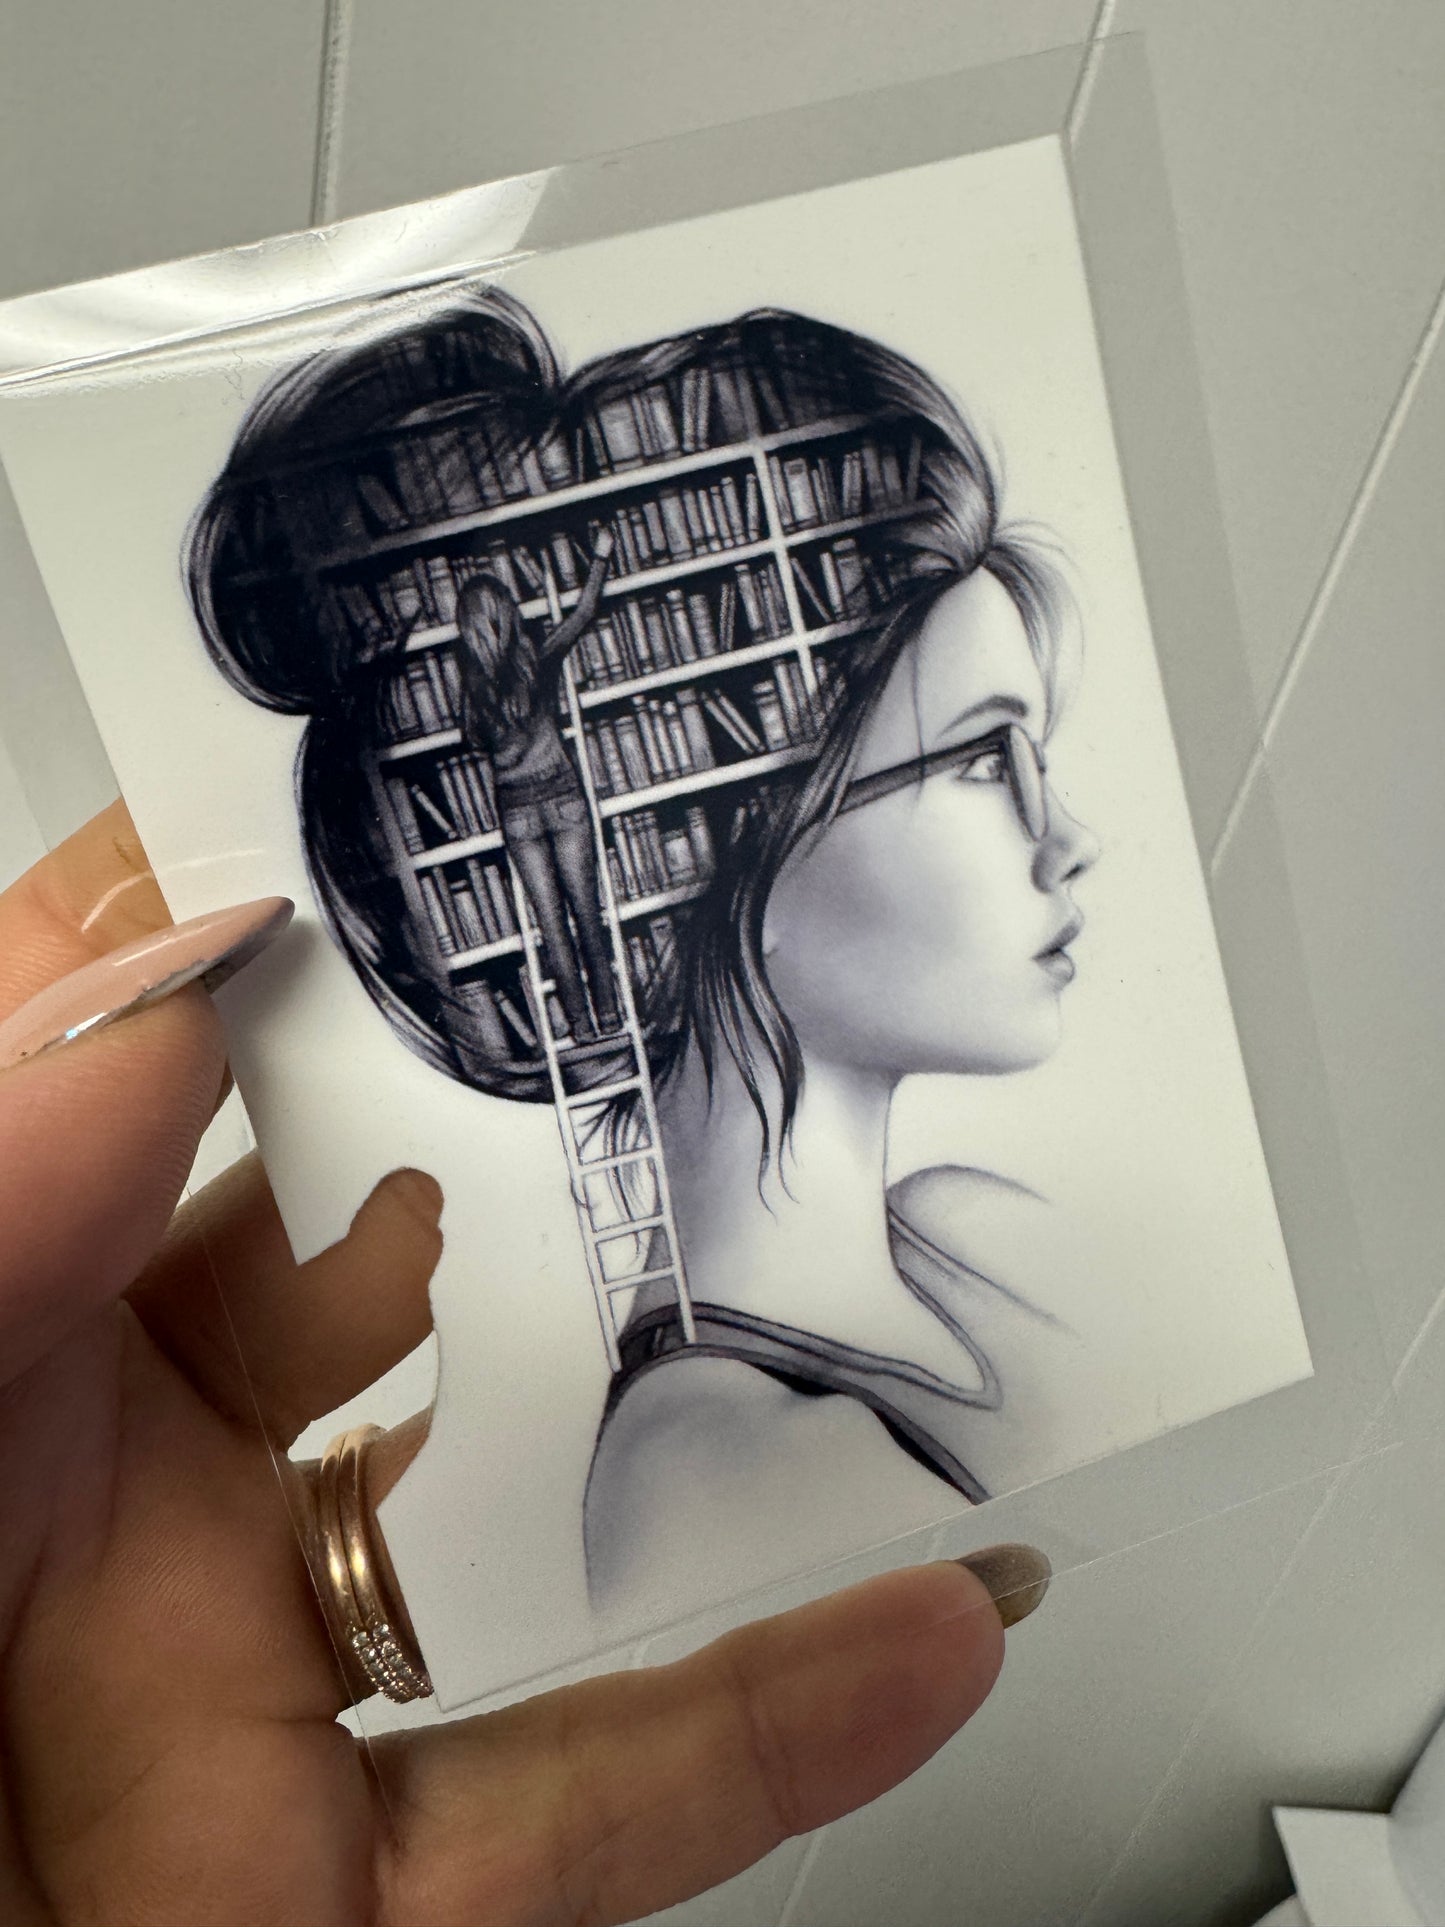 Book girl - PRINTING ISSUE